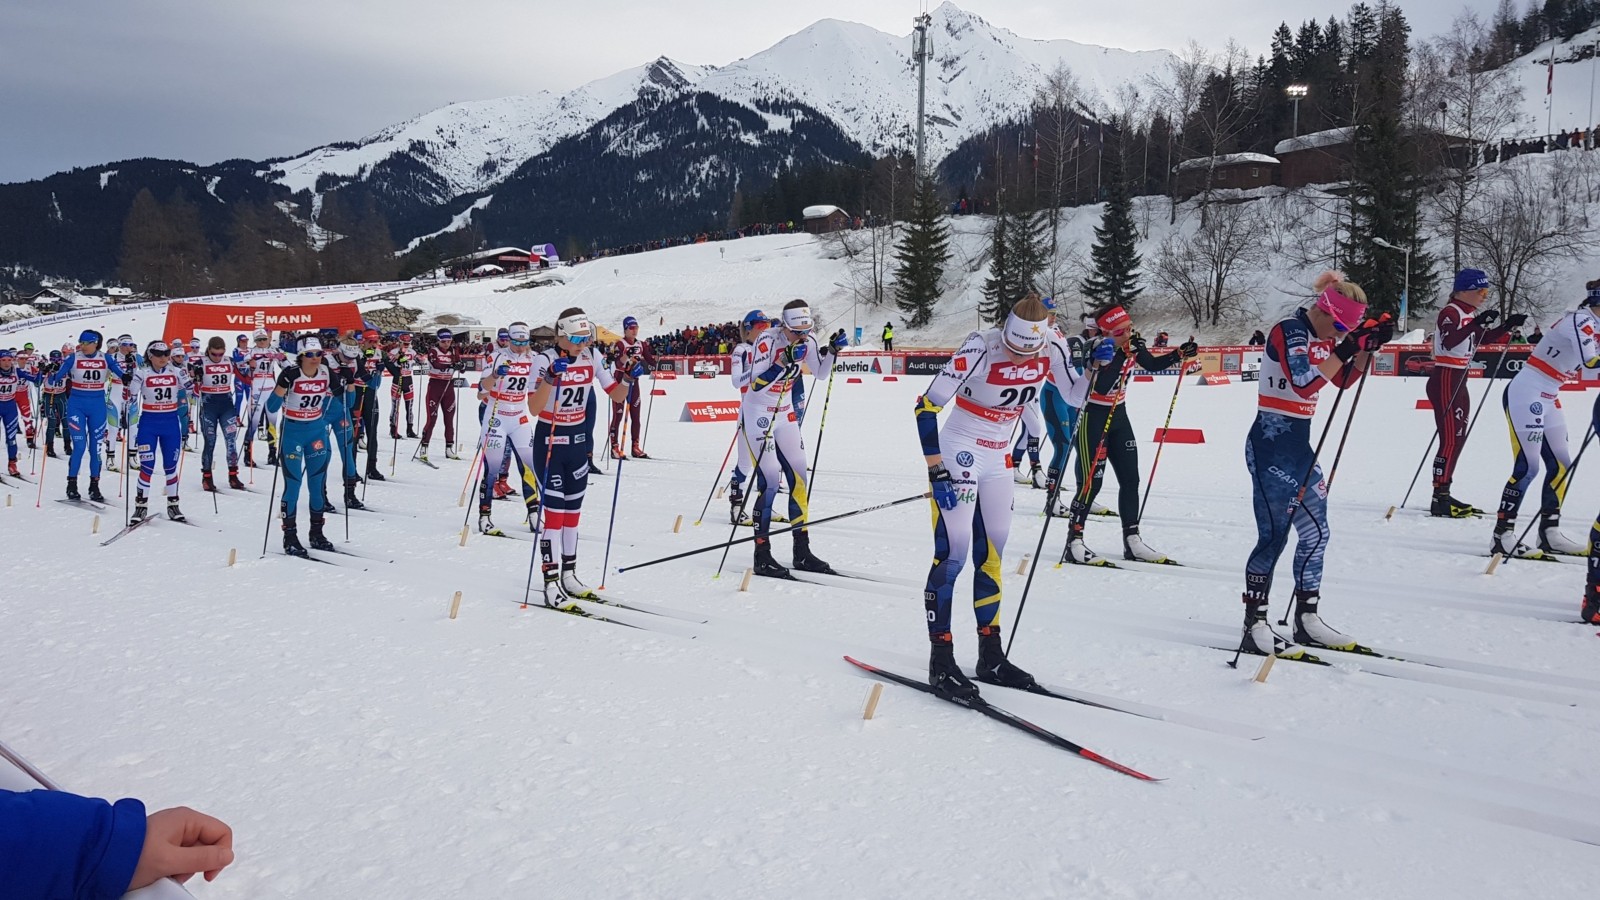 Part II Of Let’s Look At Who Is Running In Ladies’ Skiathlon At Olympics